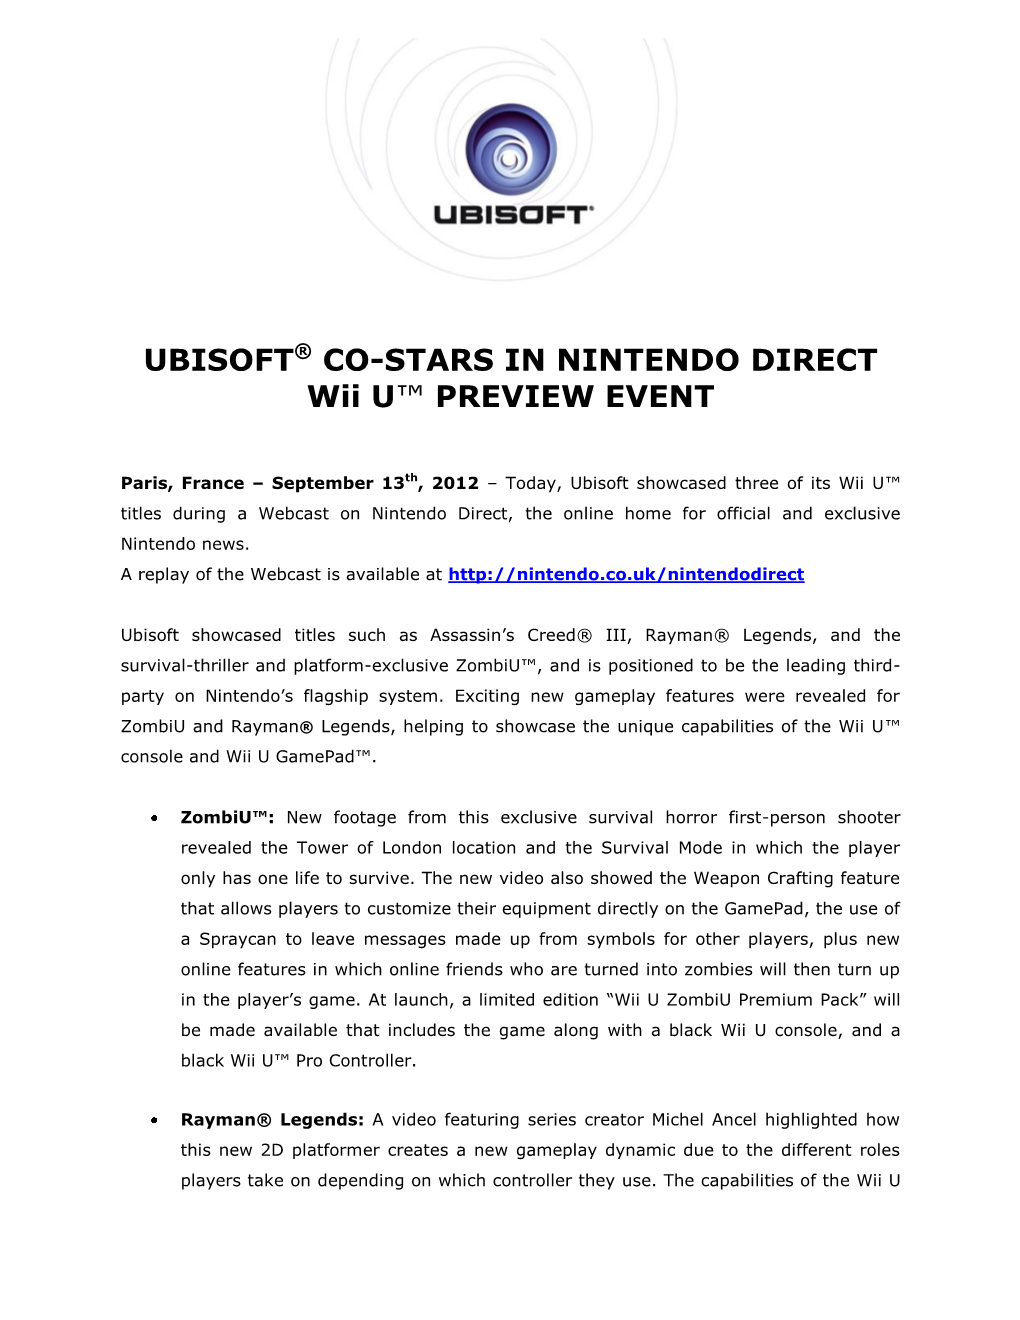 UBISOFT® CO-STARS in NINTENDO DIRECT Wii U™ PREVIEW EVENT